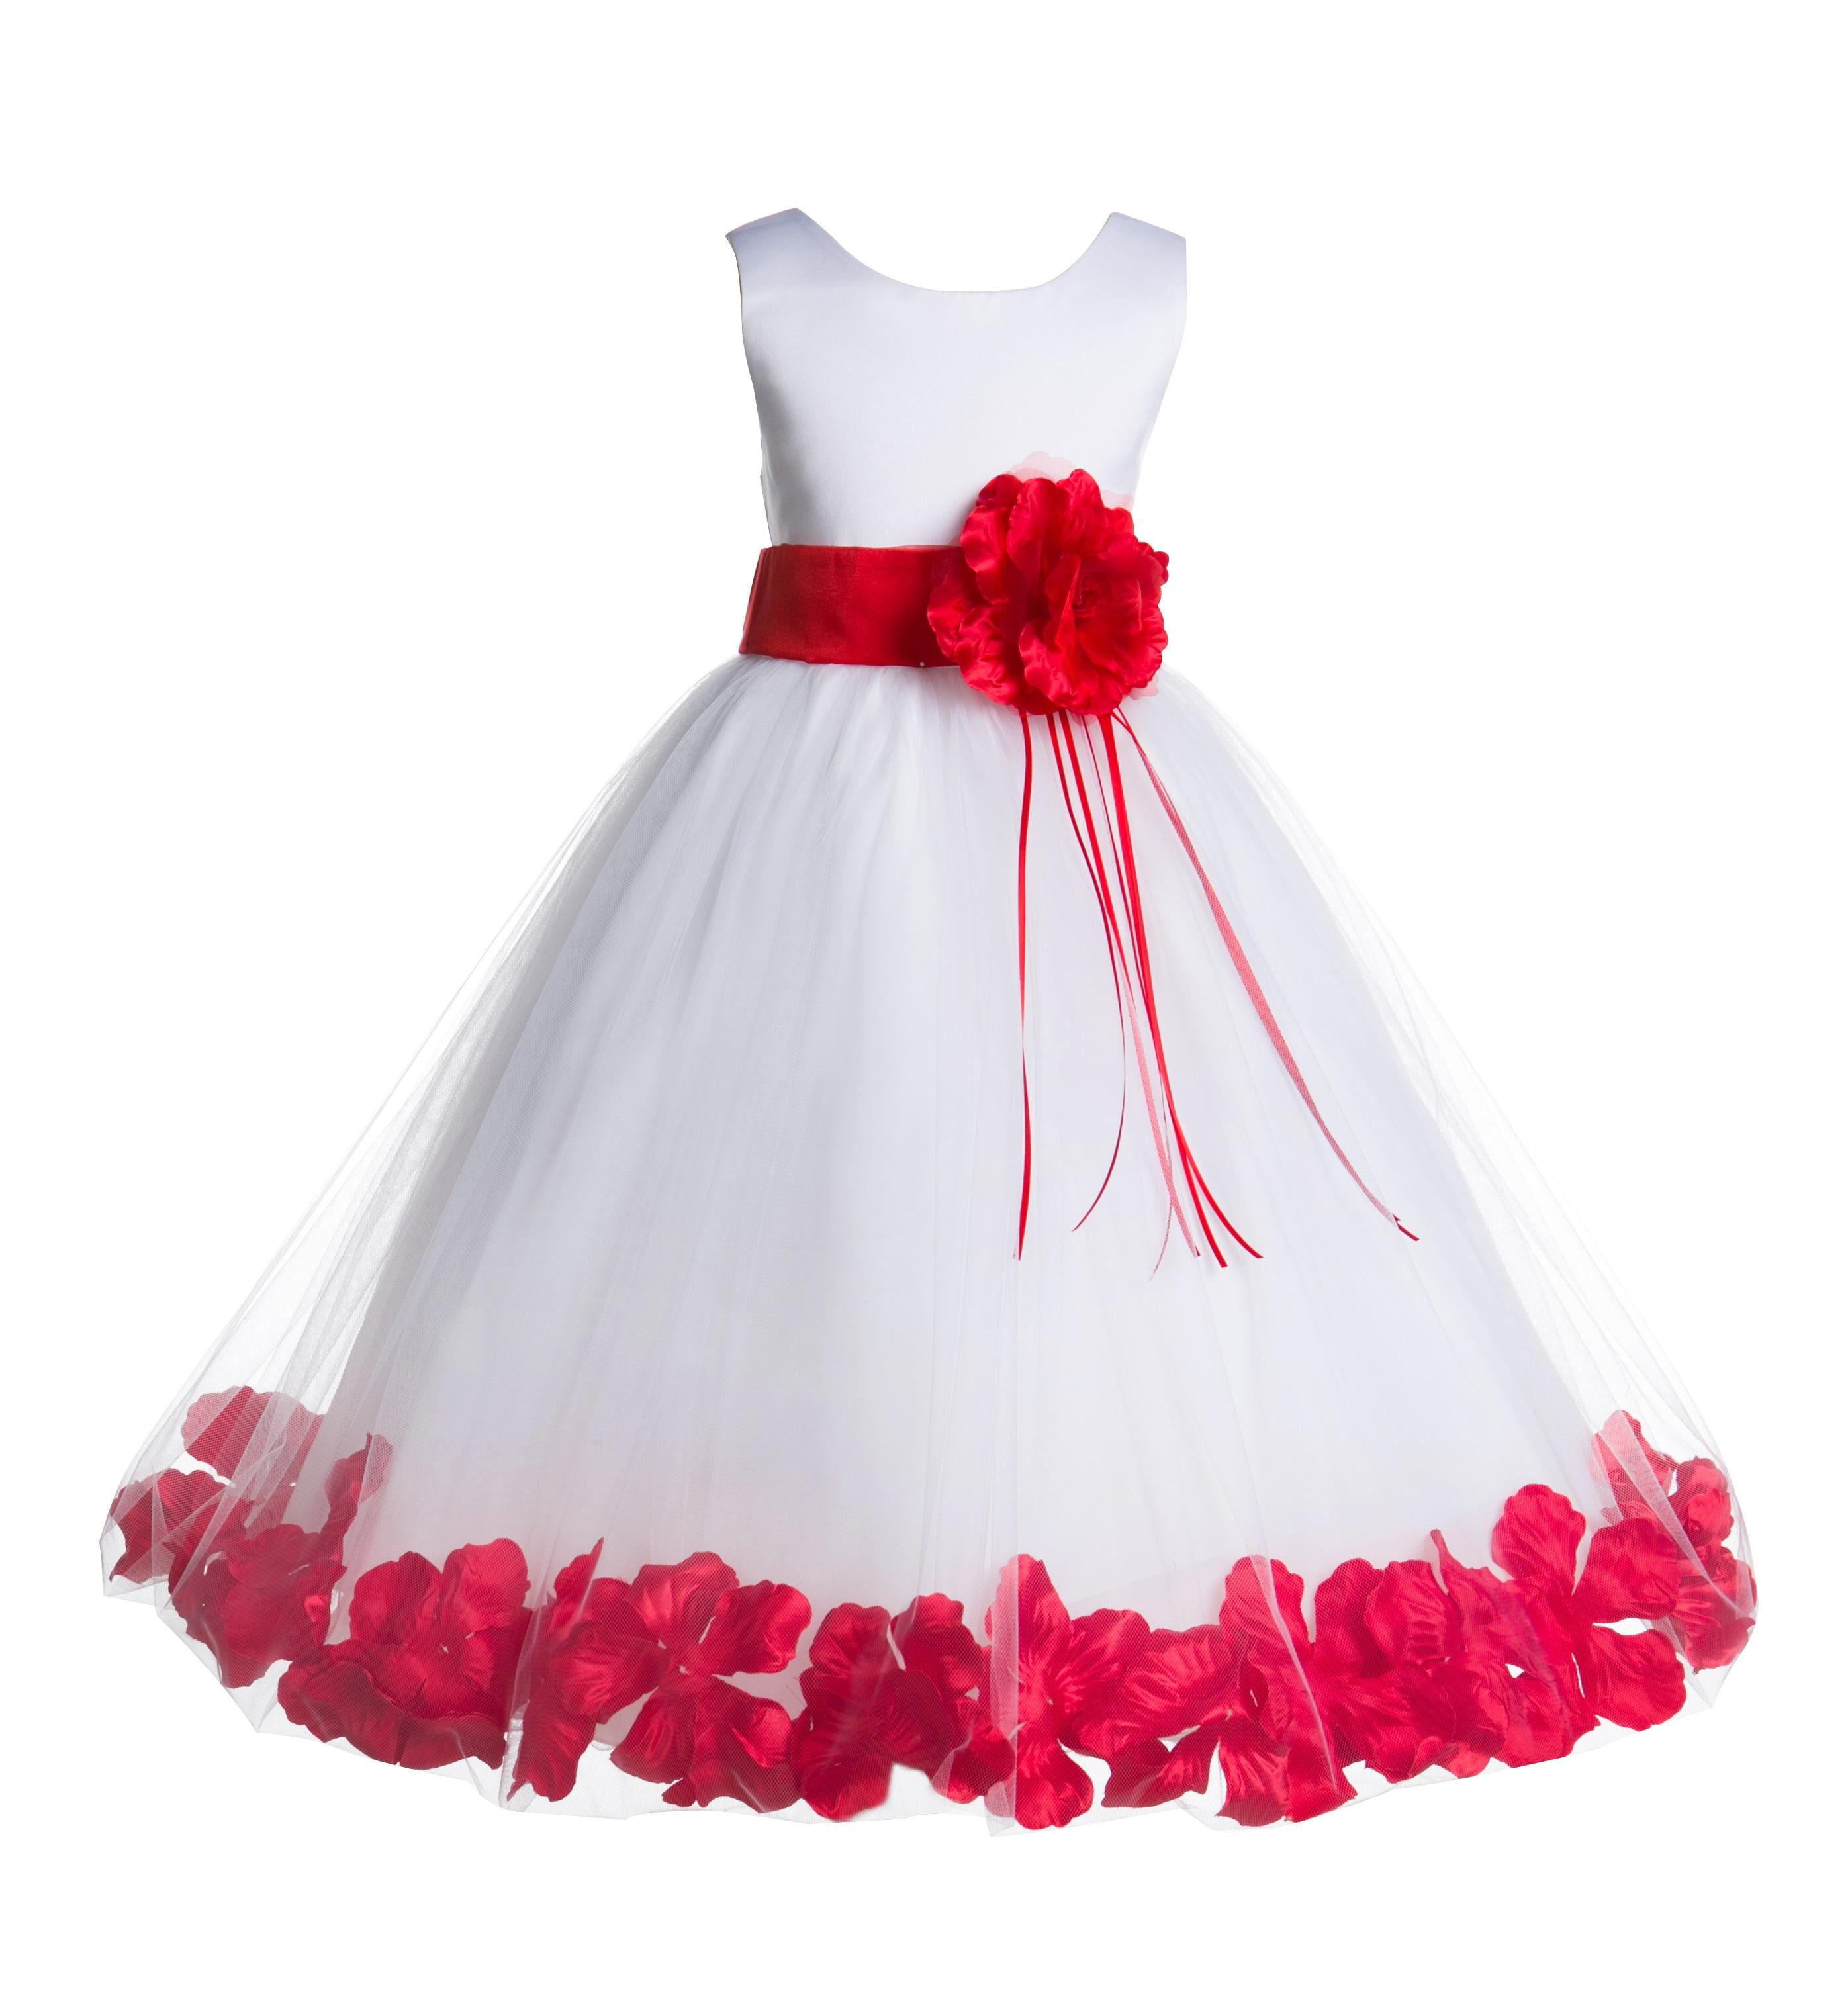 Toddler Girls Petals Tulle Tutu Dress Princess Wedding Pageant Party Formal Gown